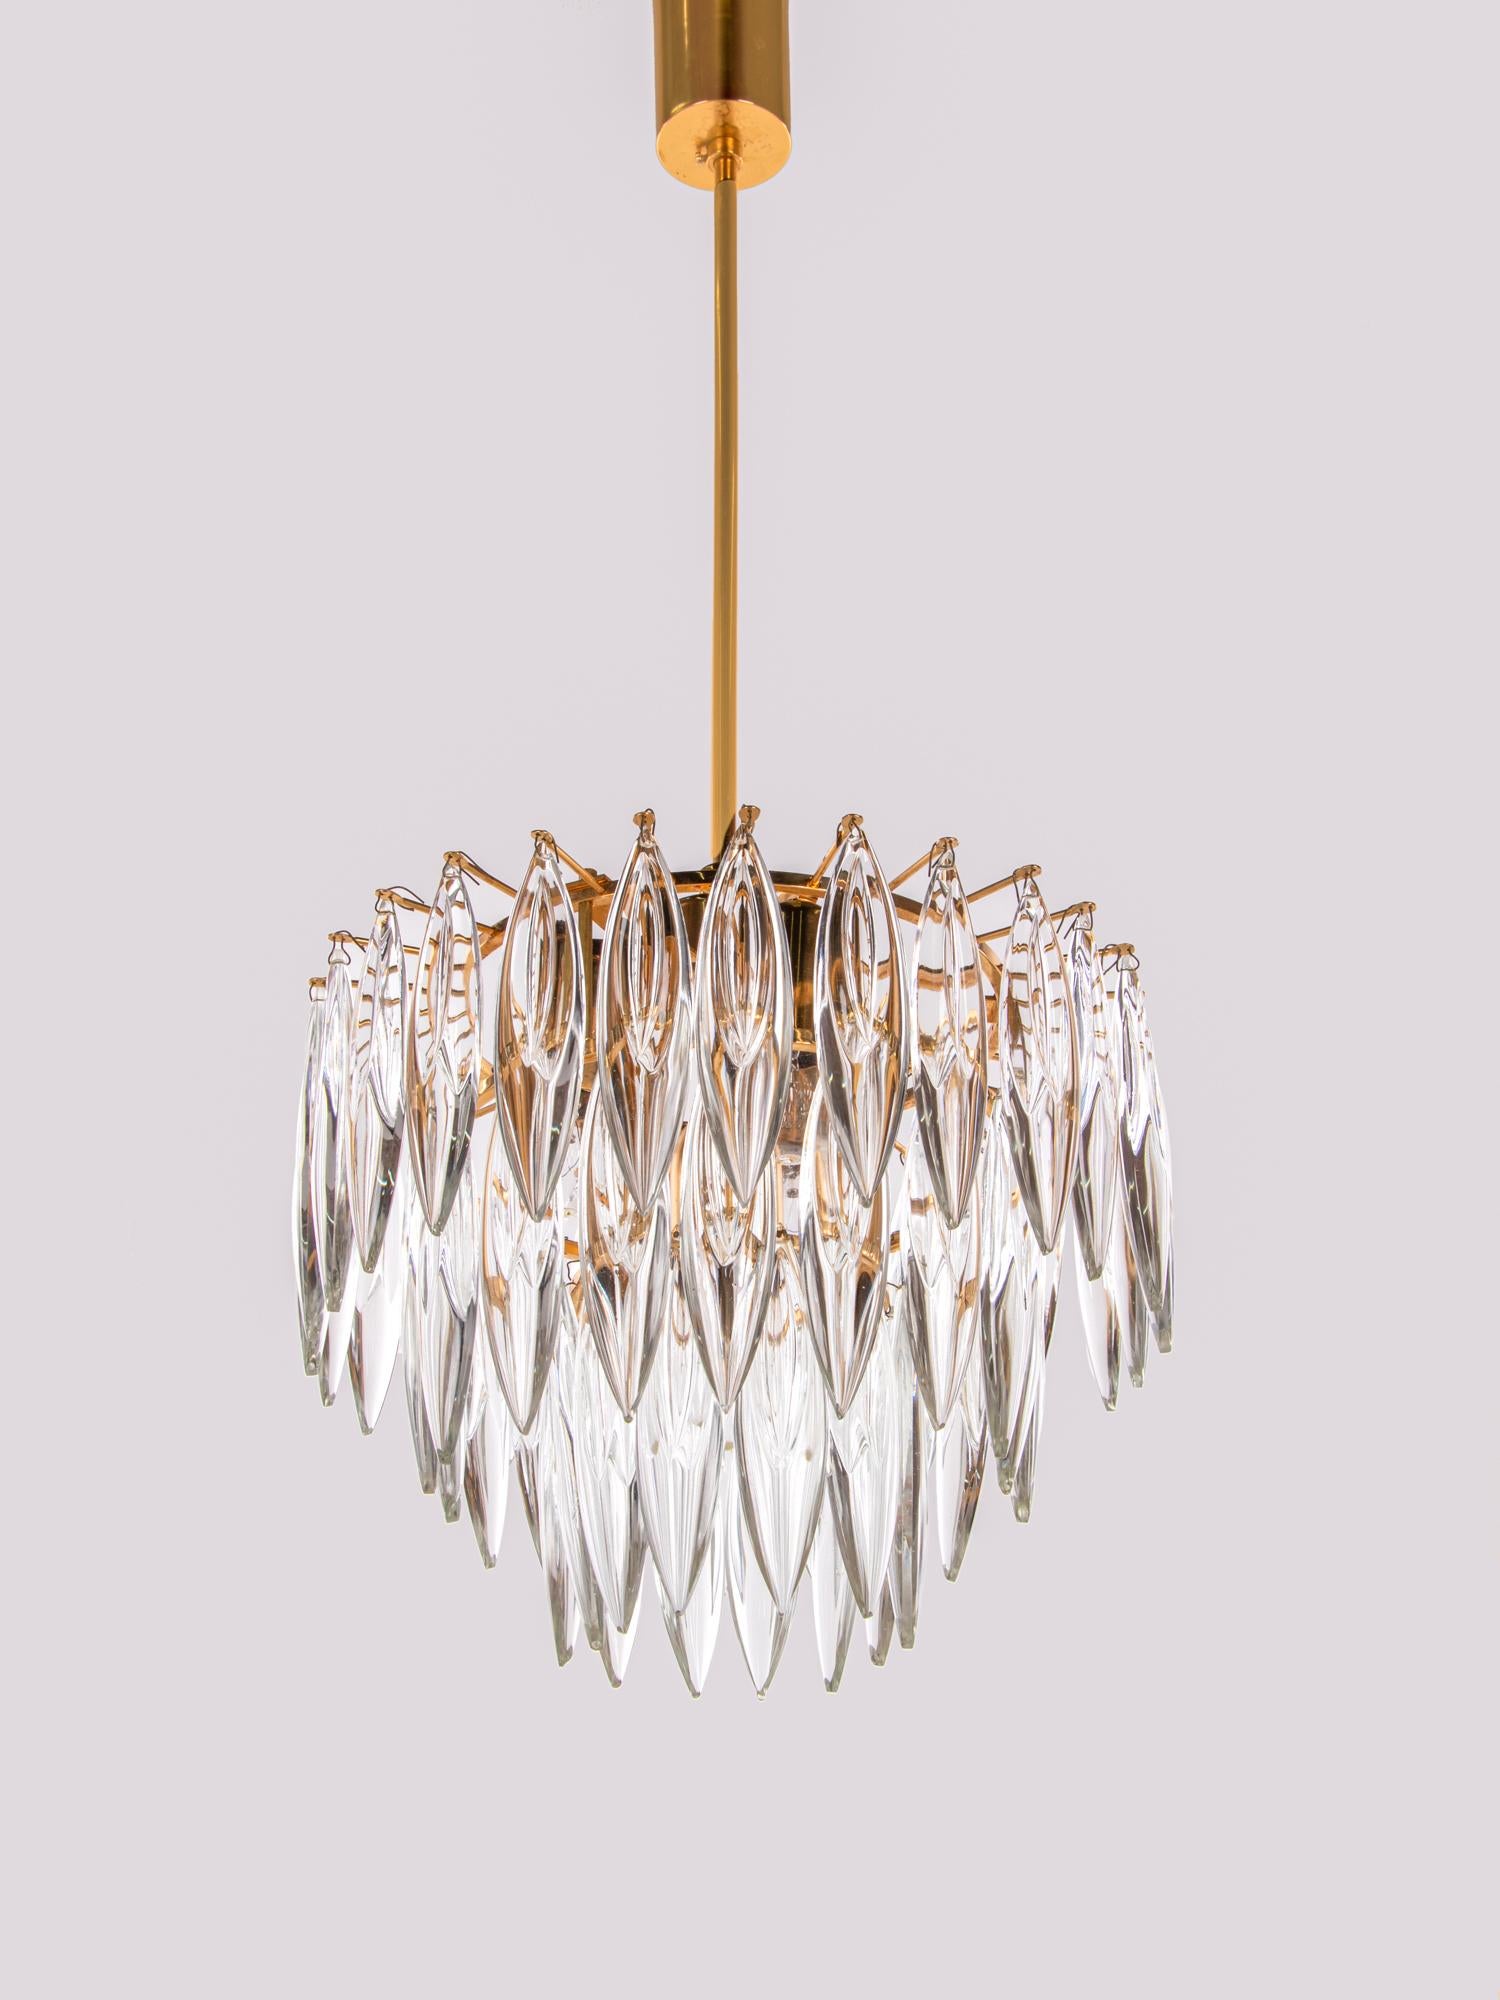 Very impressive 4 lights chandelier of excellent quality with long crystals on a gold plated frame. Manufactured by Lobmeyr / Bakalowits & Sons in Vienna, Austria in the 1960s. 

The lamp has an incomparable unique character through its gold base